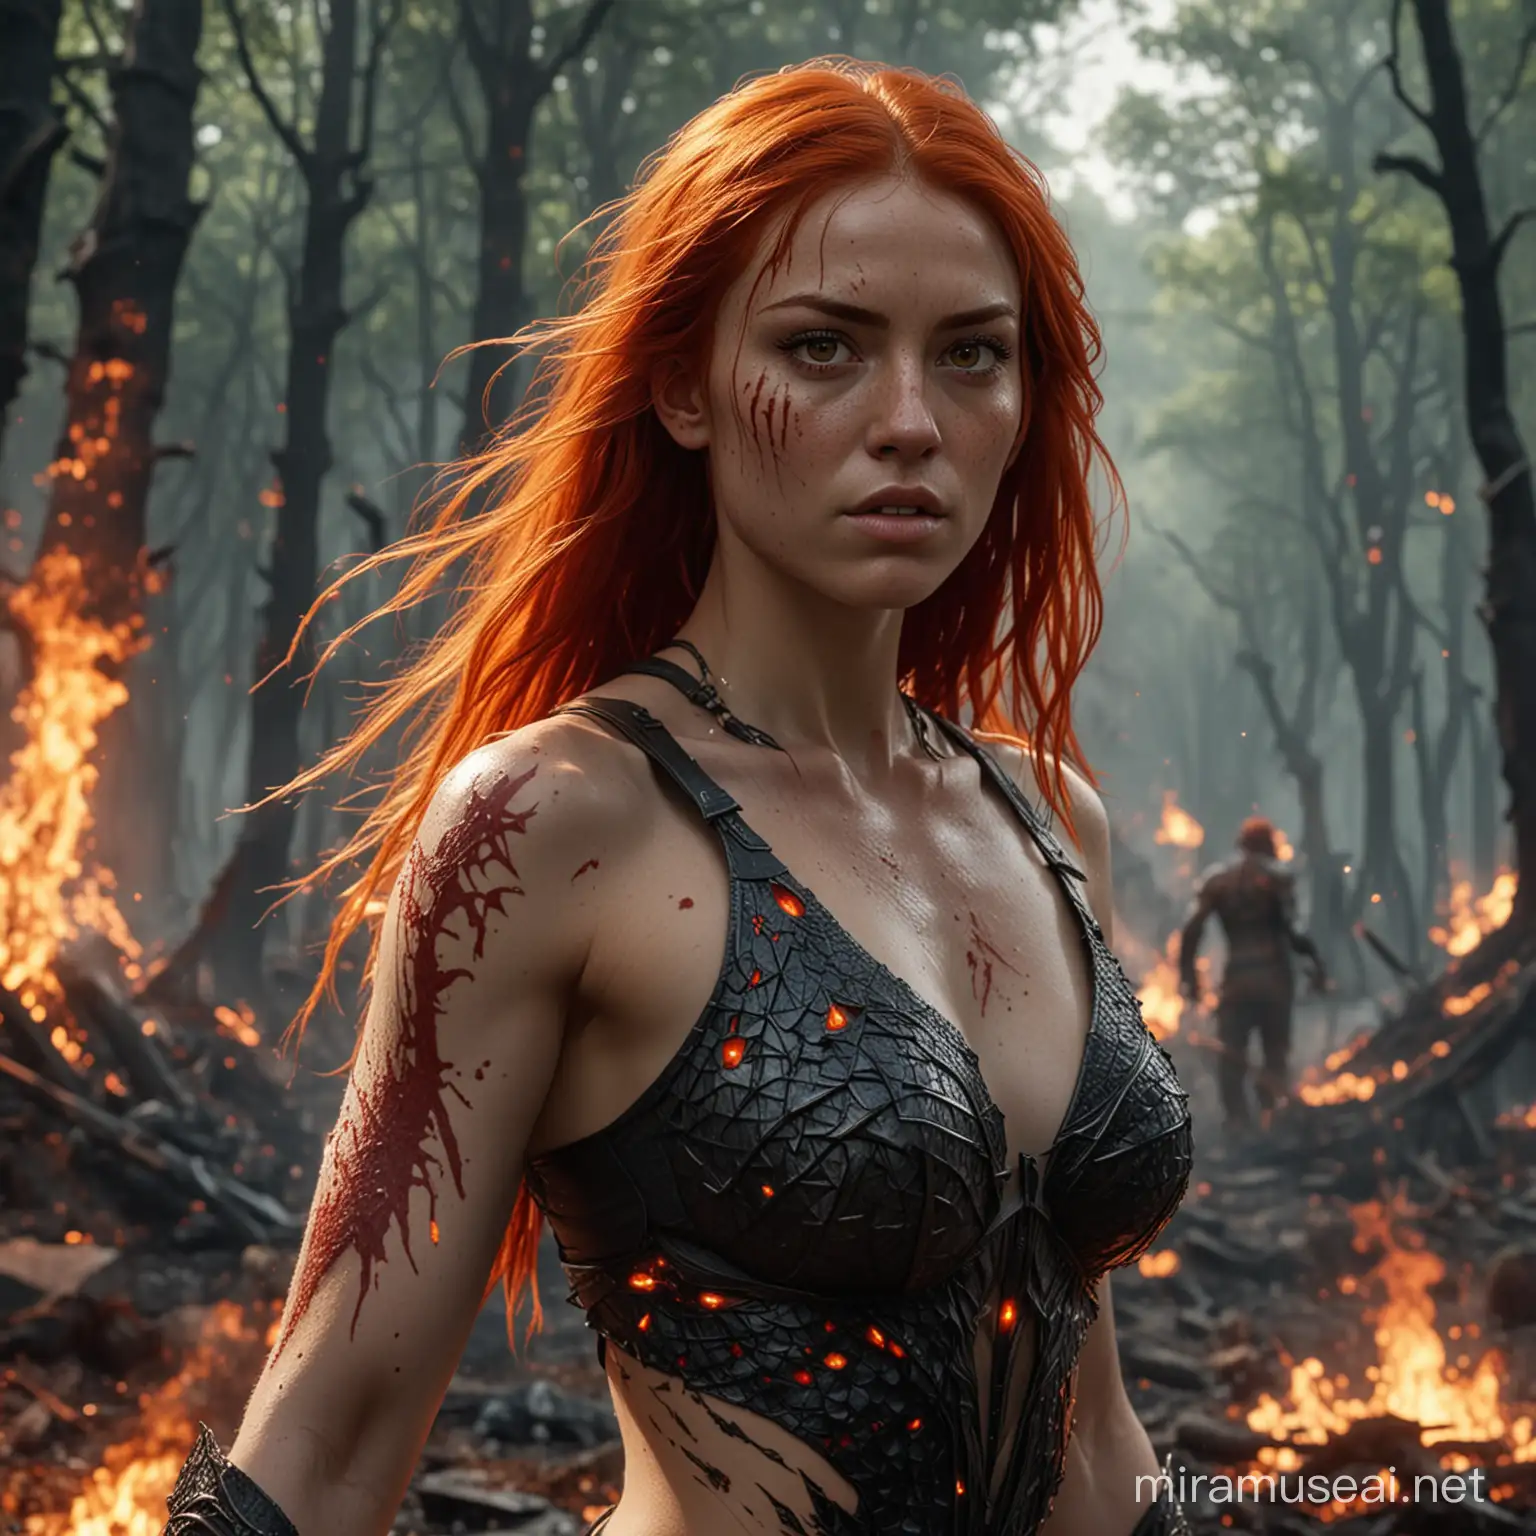 hyperrealistic very high detail 4k full body long shot photograph taken from the left with depth perception, showing a female human with long fiery red hair thin red eyebrows, burning red eyes and face full of freckles, with draconic symbols carved into arms and body, sleeveless open front top made of dragon scales, fighting in a bloody battle in a forest, throwing bolts of lightning from her hands.